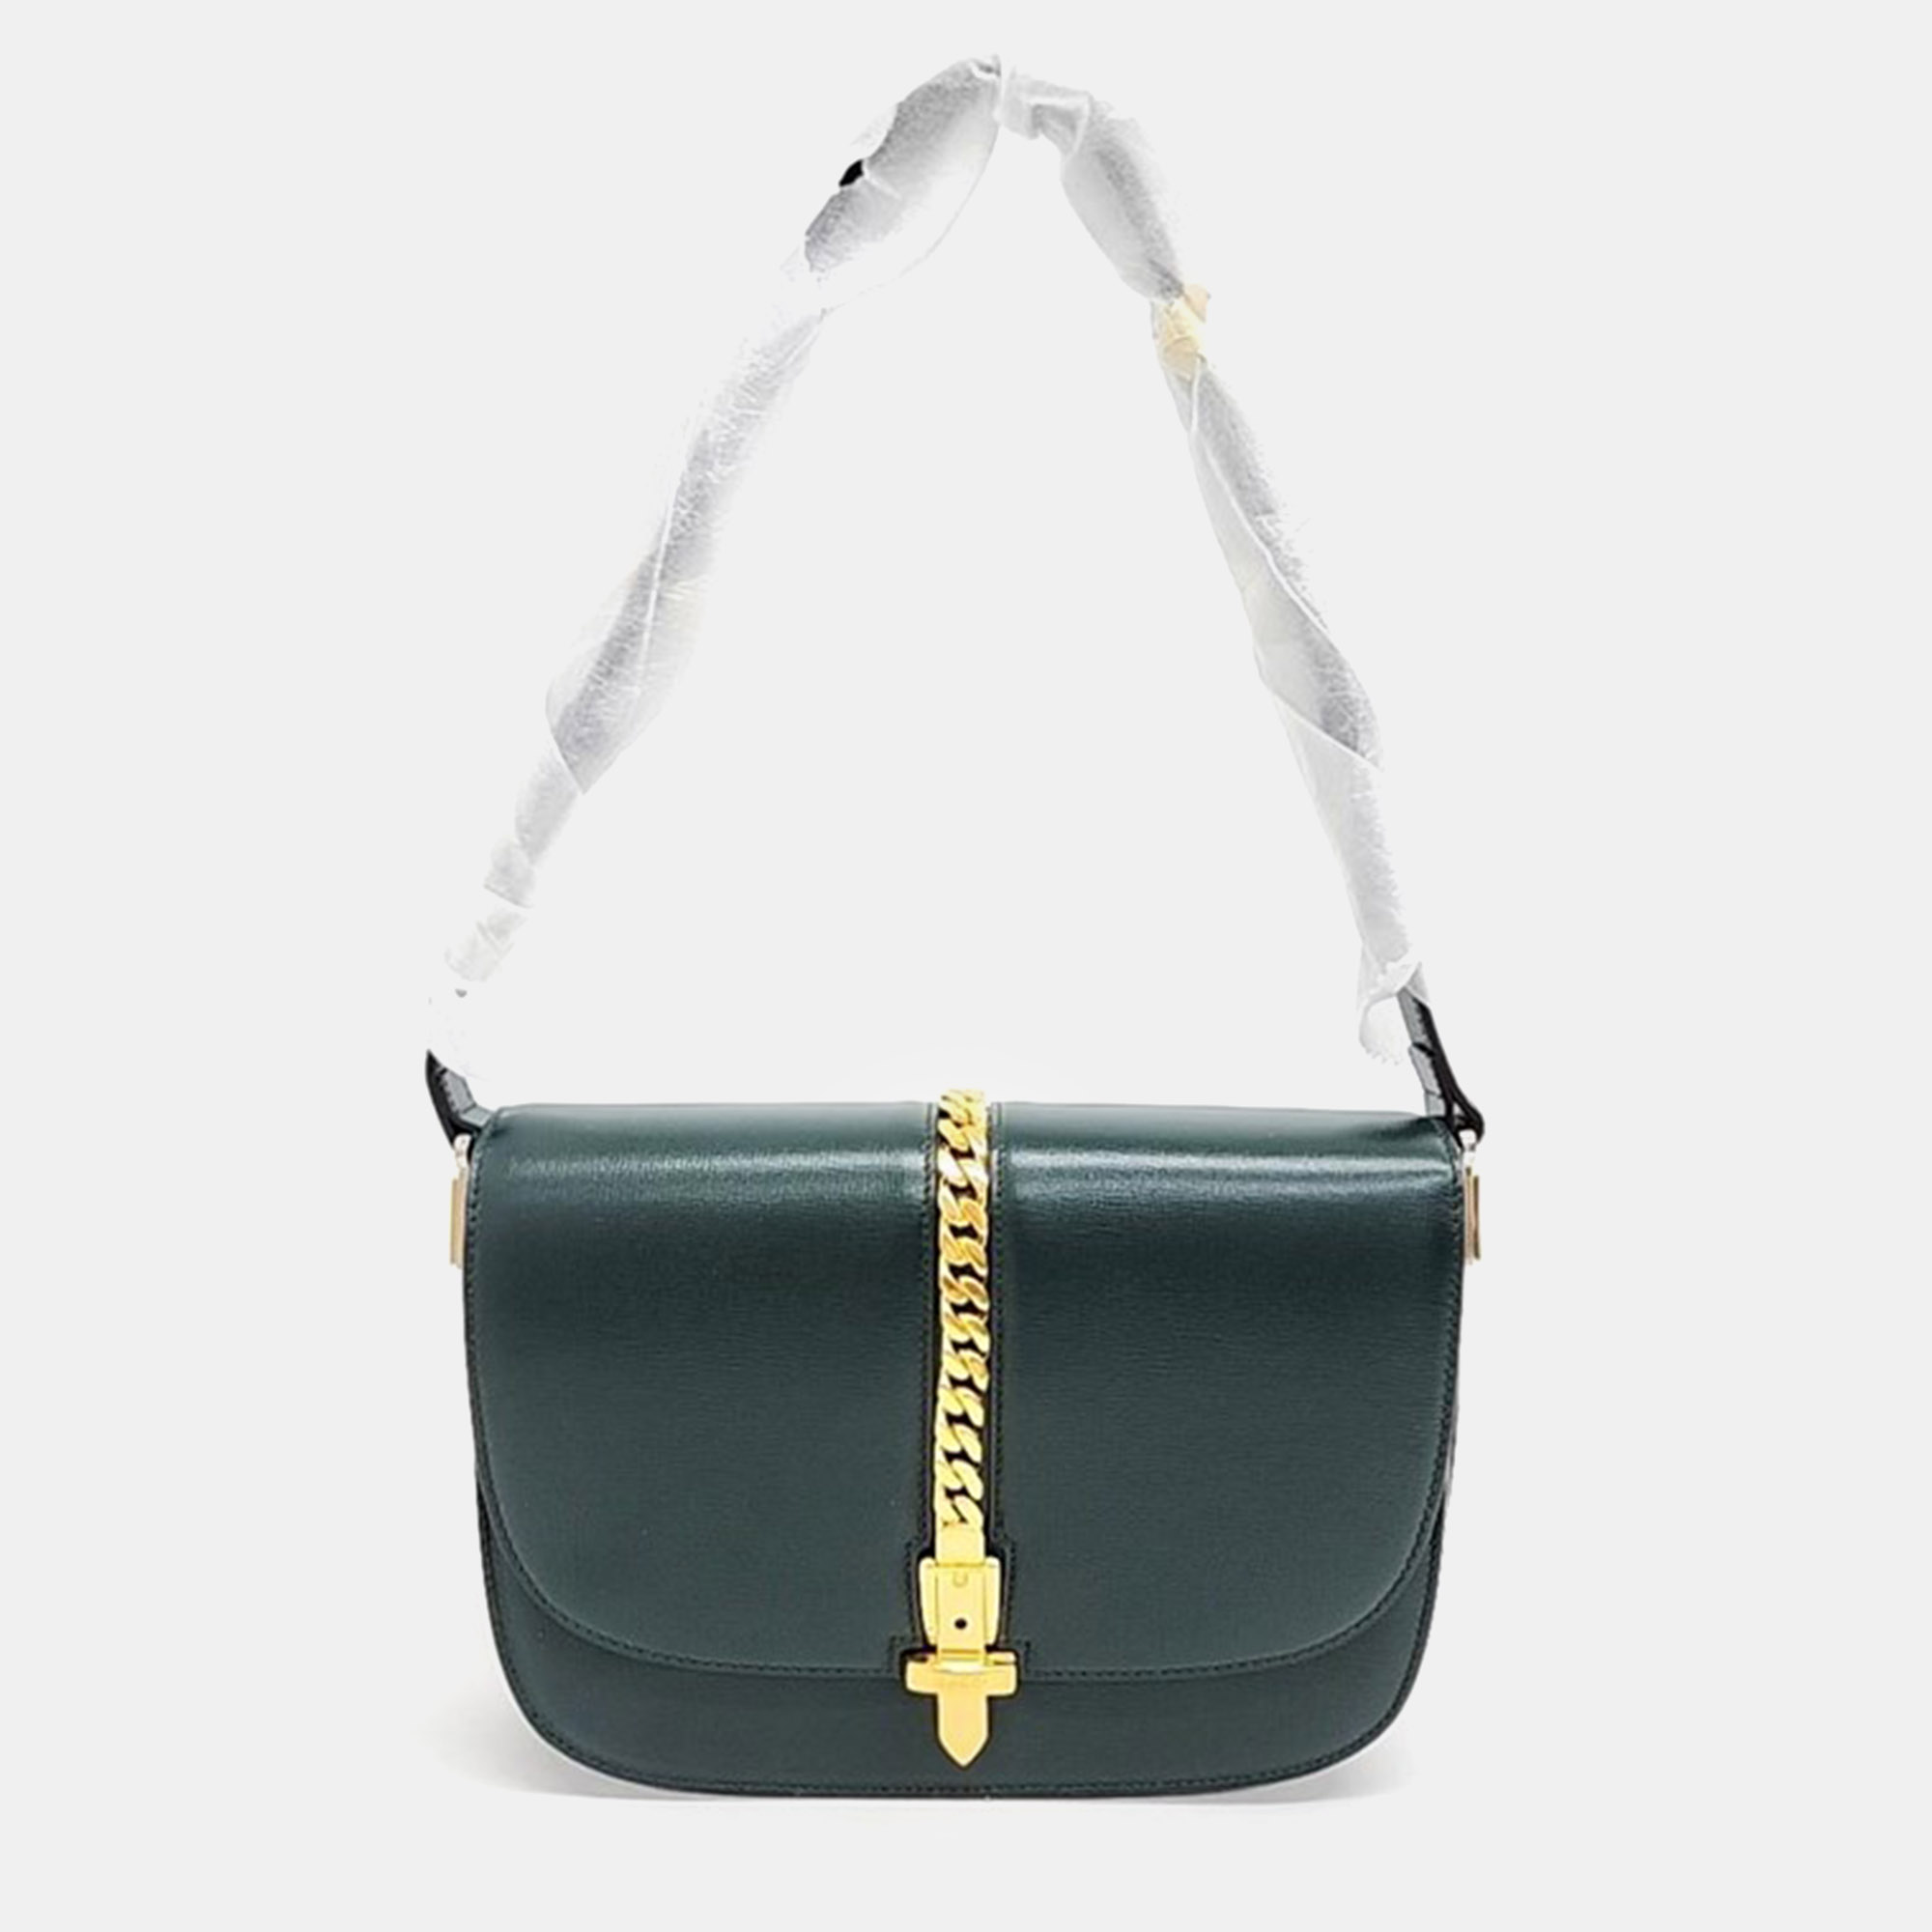 Uncompromising in quality and design this Gucci shoulder bag is a must have in any wardrobe. With its durable construction and luxurious finish its the perfect accessory for any occasion.